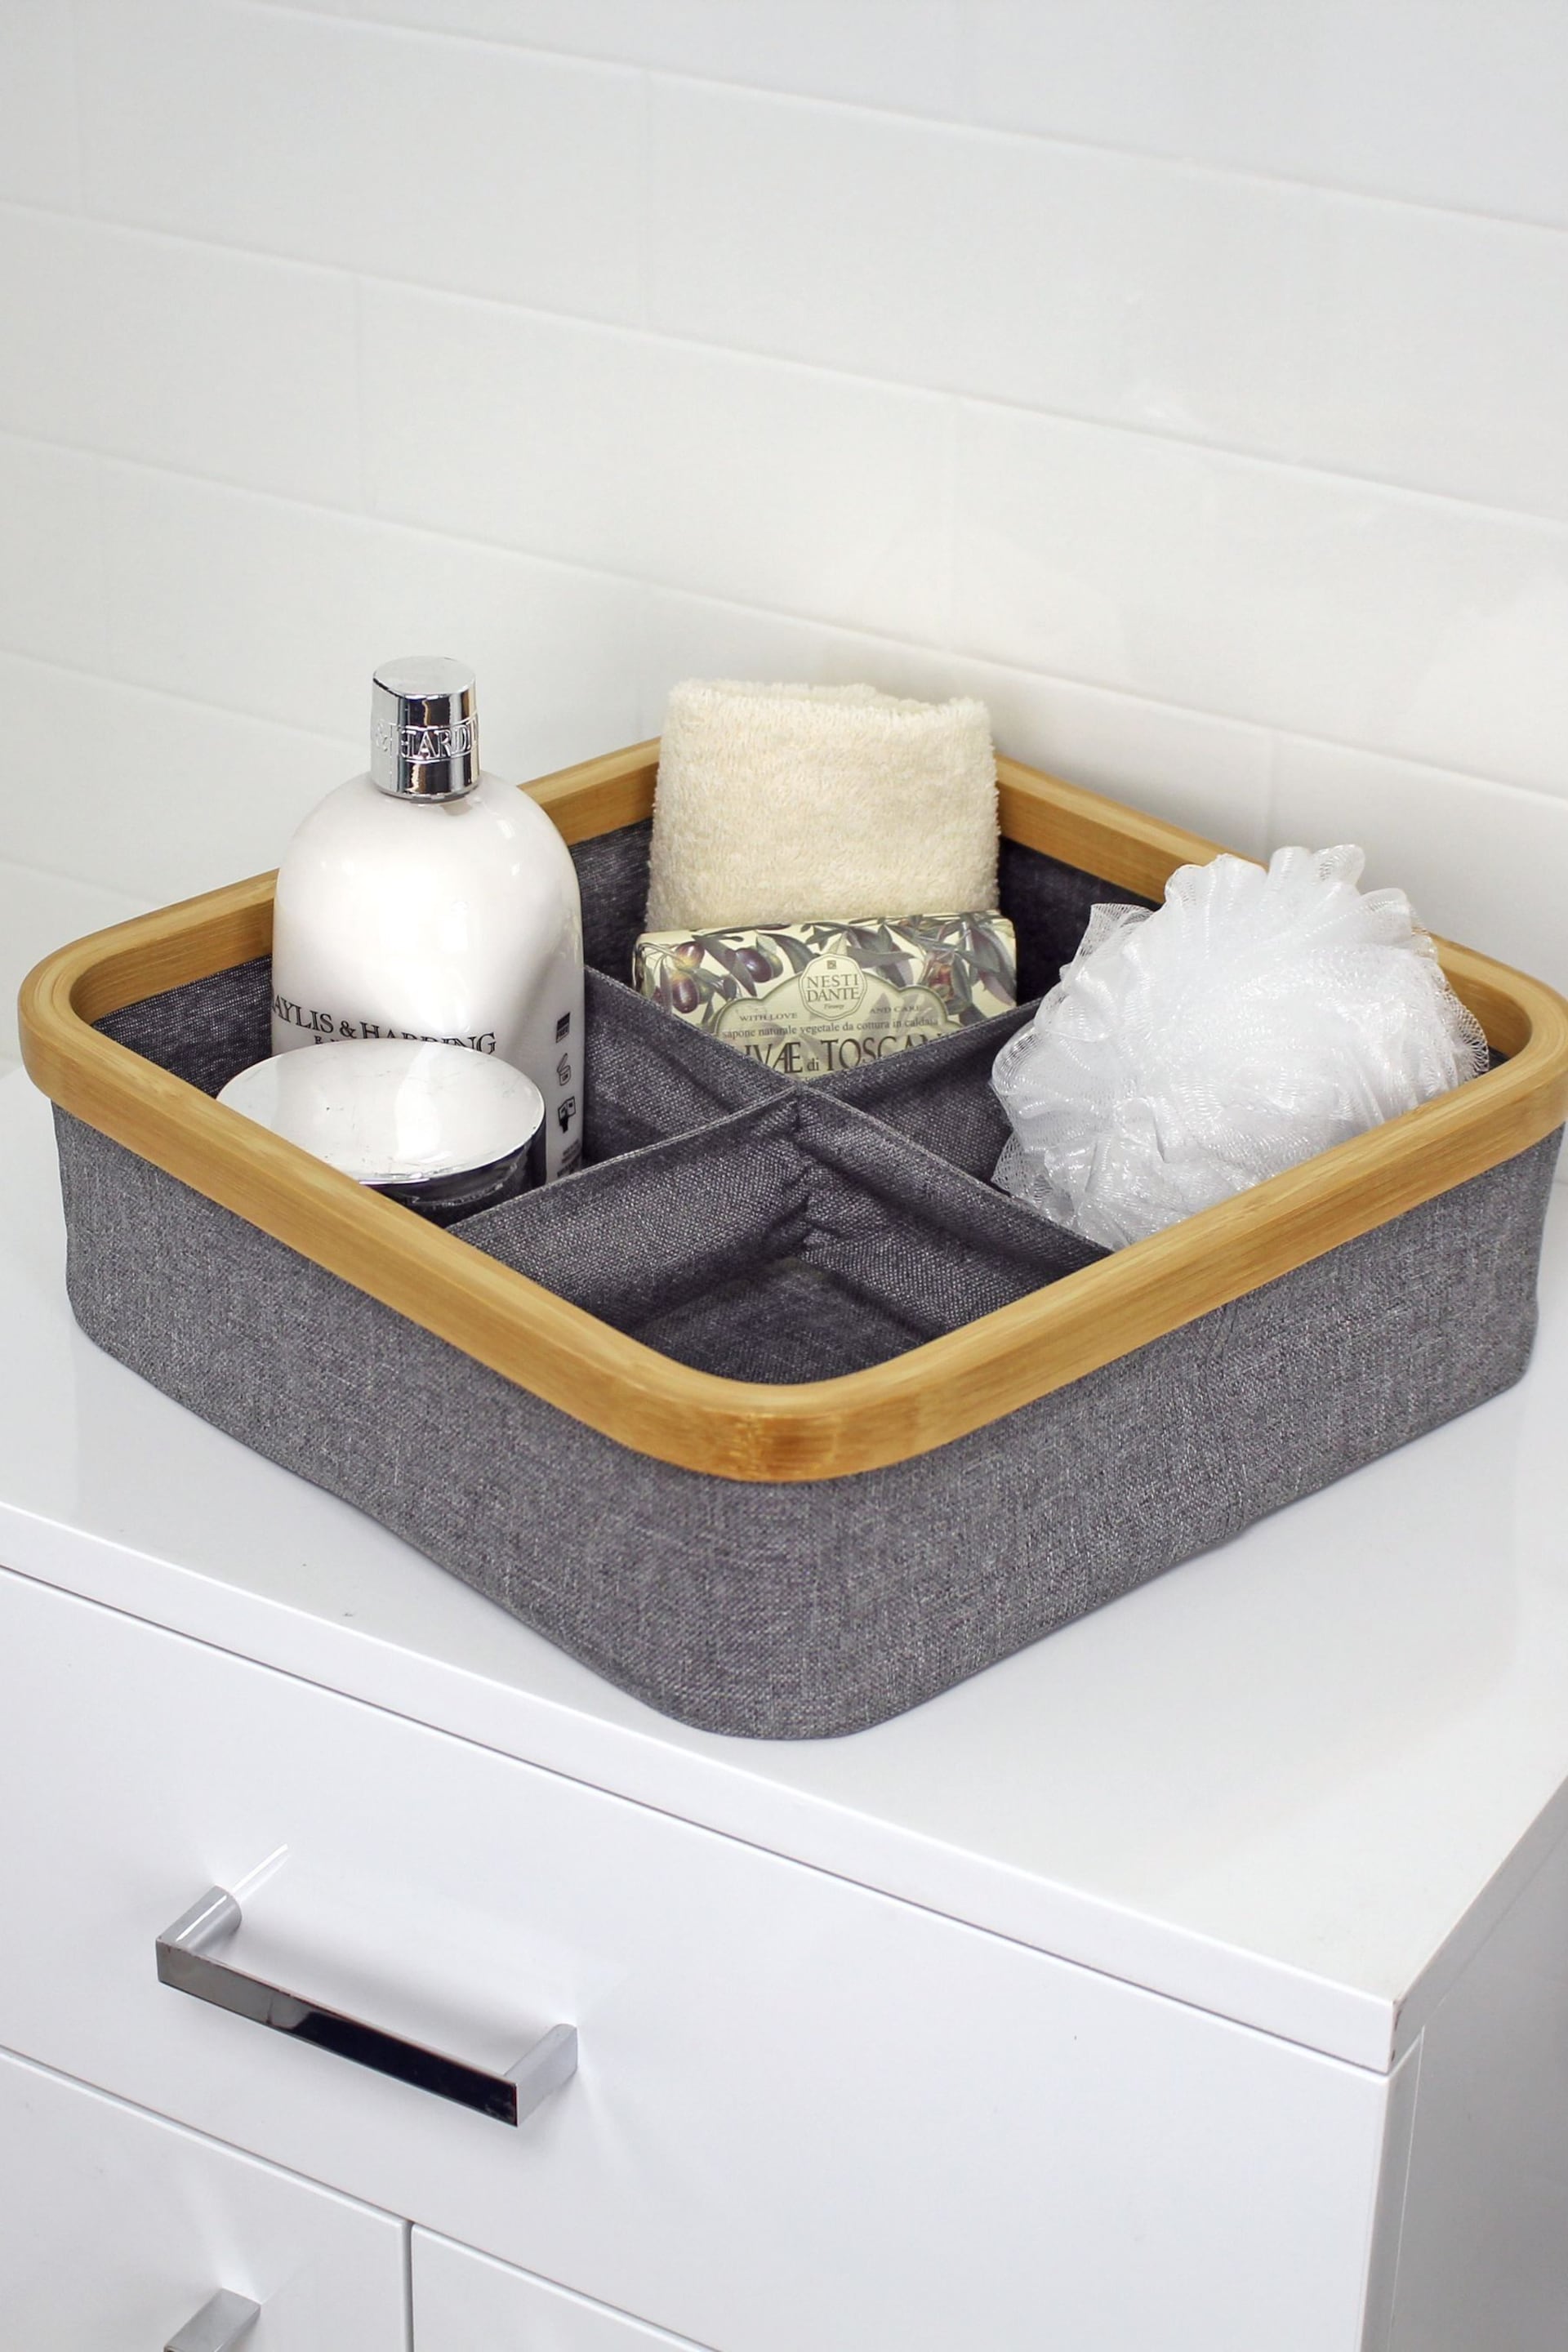 Showerdrape Grey Cotswold Storage Tray with 4 Compartments - Image 1 of 4